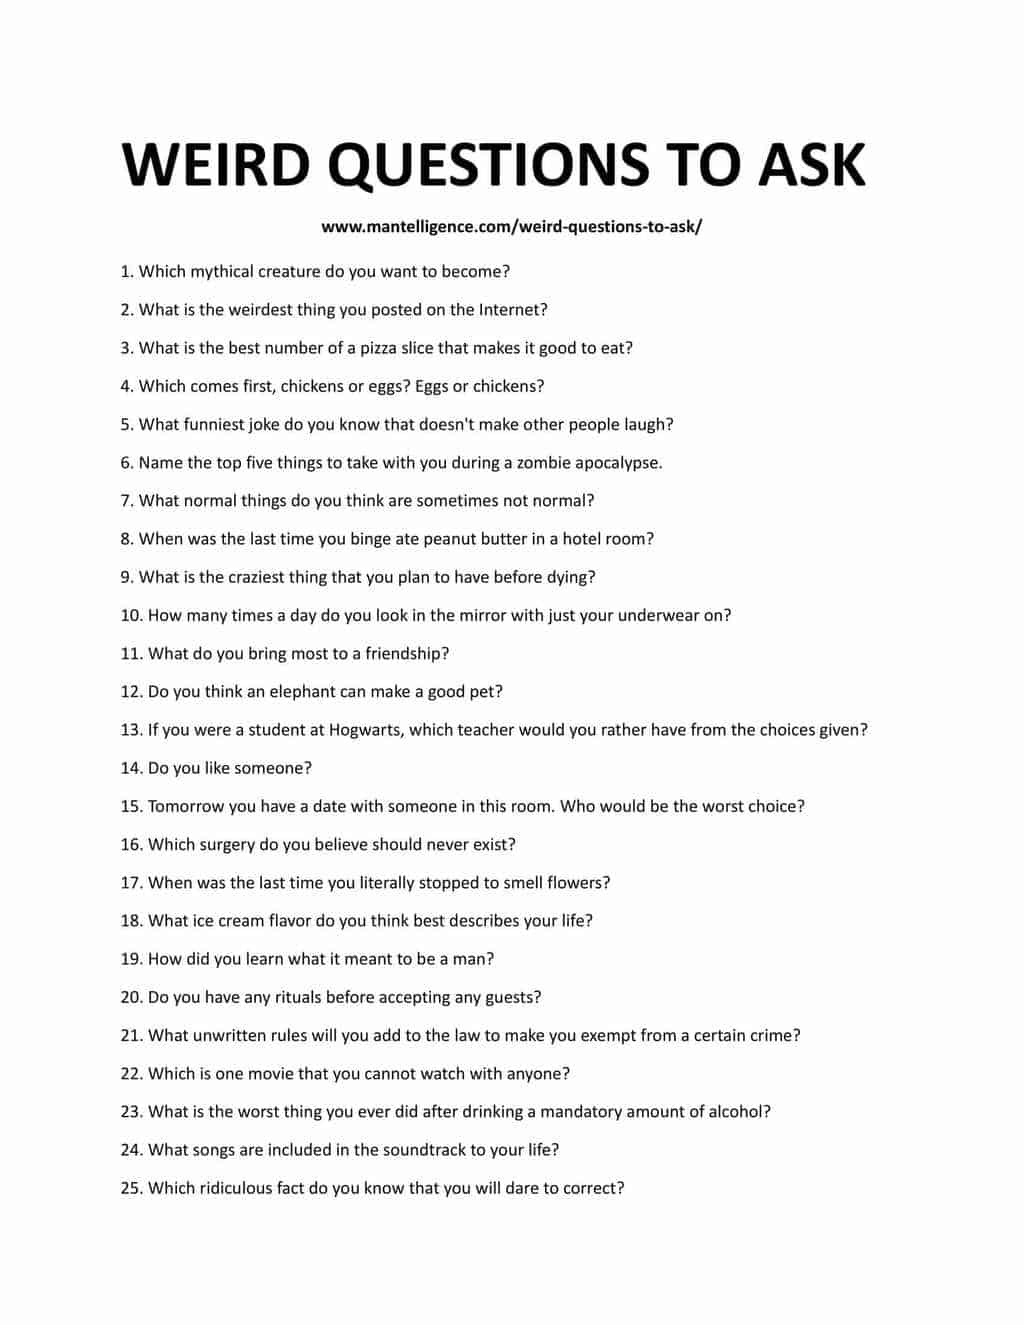 63 Weird Questions To Ask - Make Fun And Wonderful Conversations